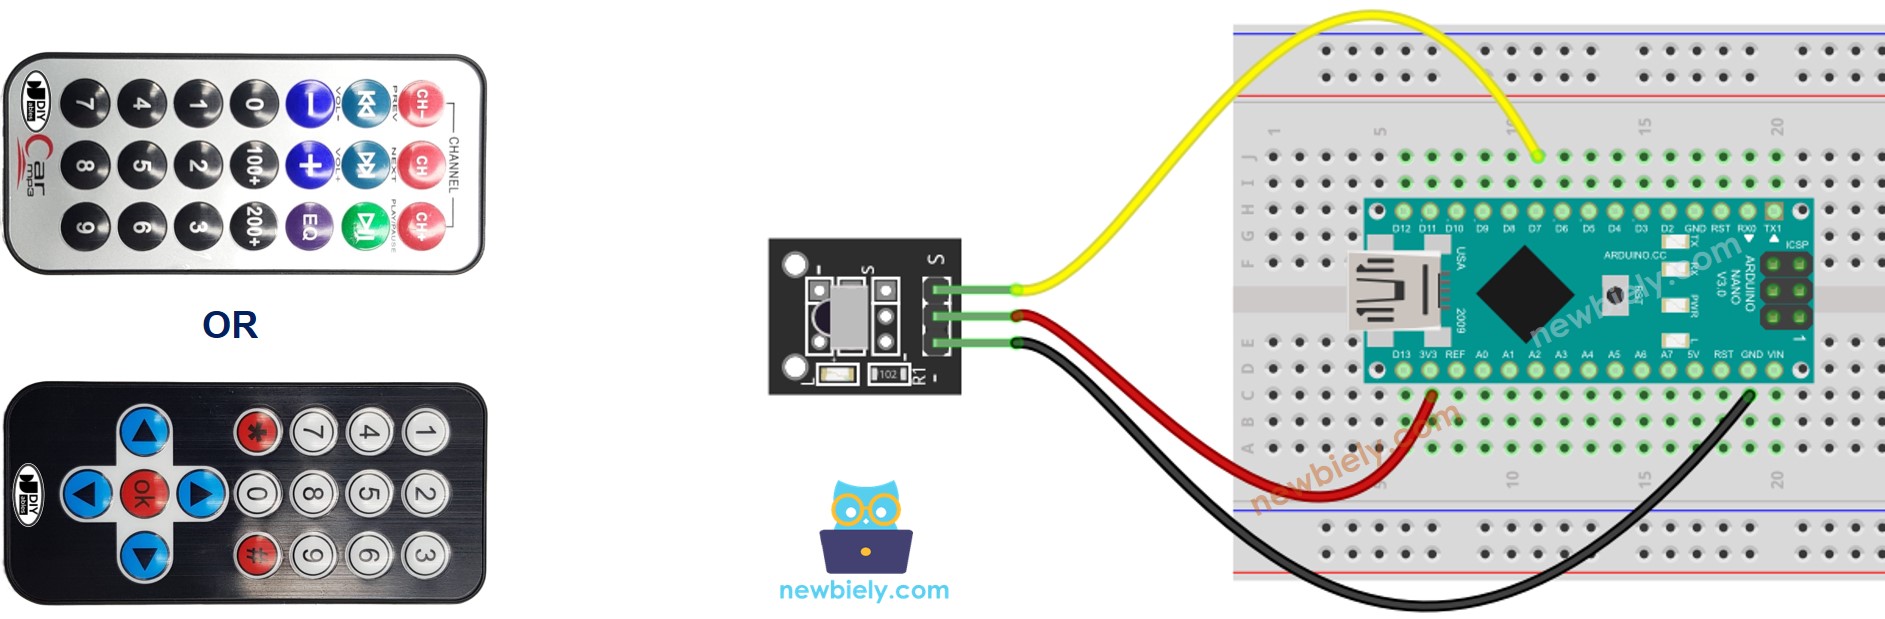 The wiring diagram between Arduino Nano and IR Remote Control